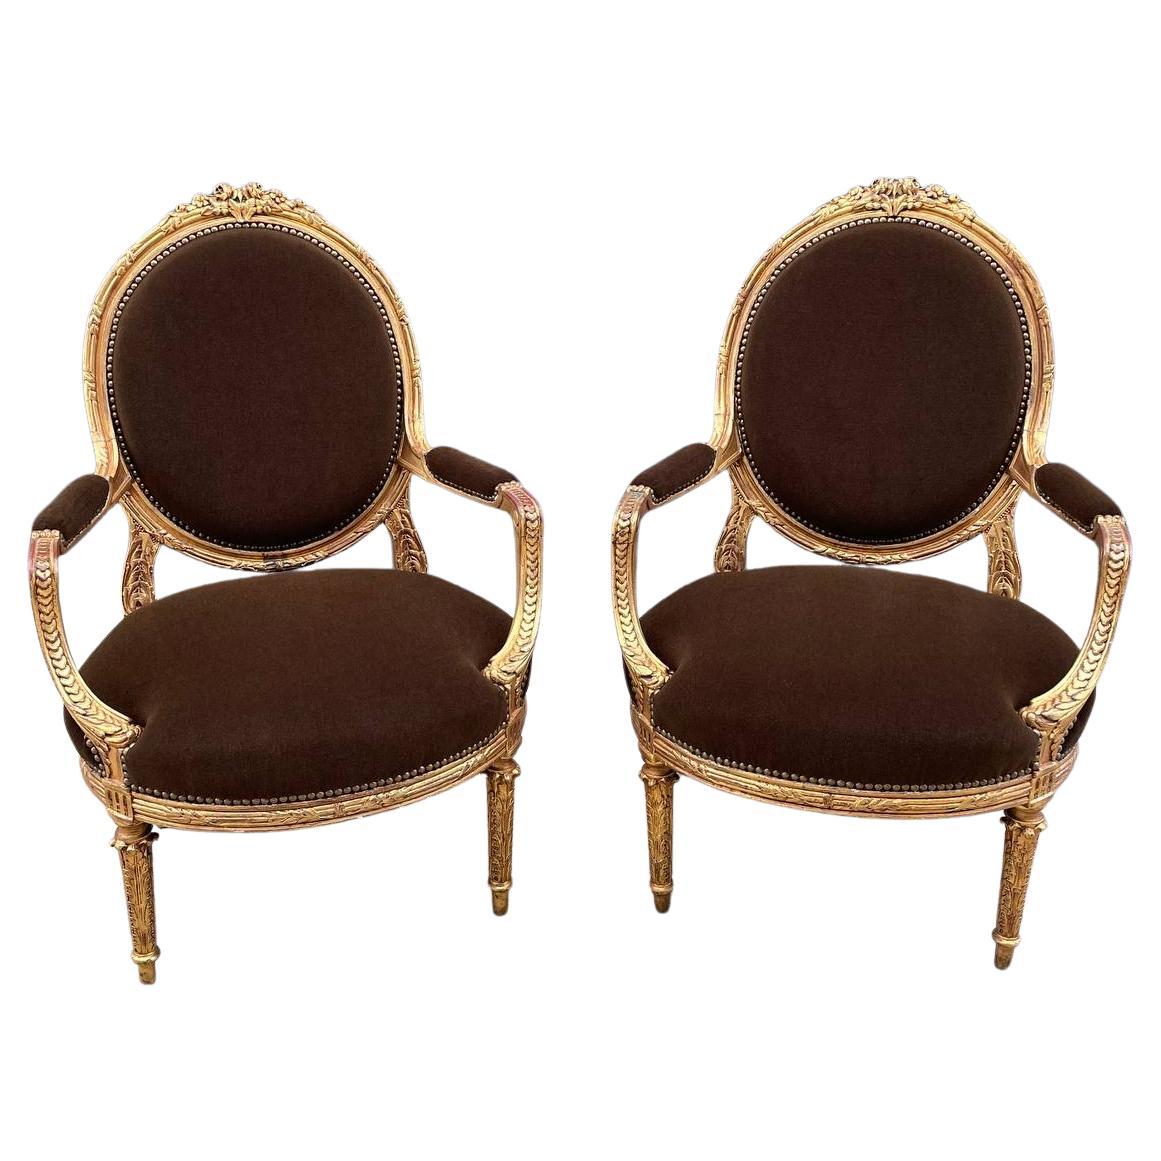 Pair of French Neoclassical-Style Giltwood Armchairs